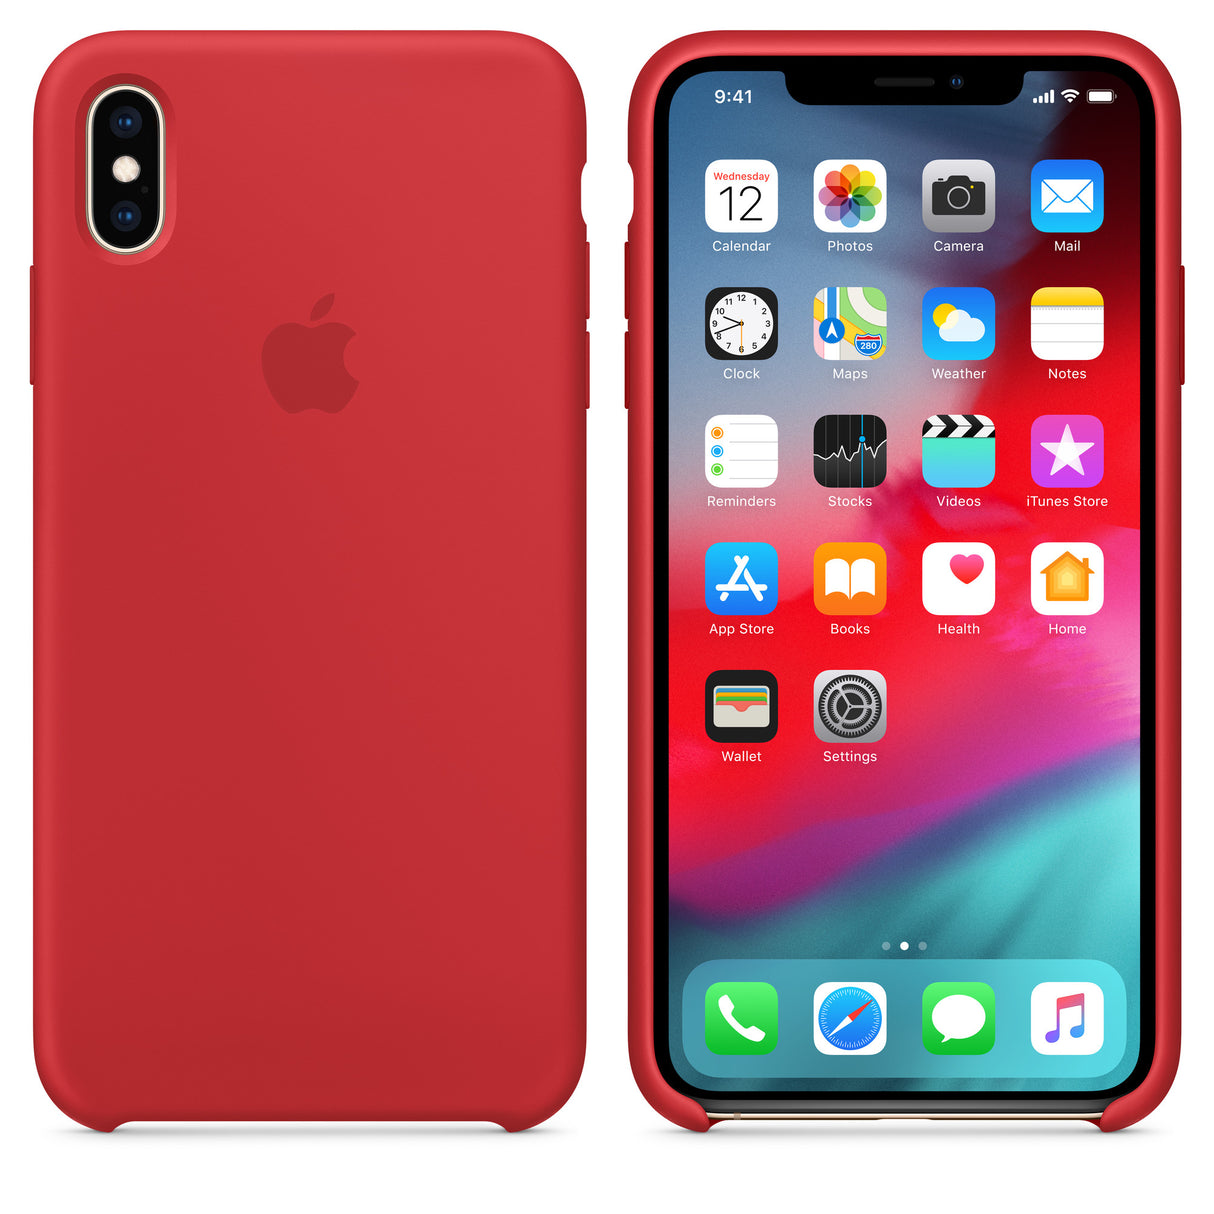 iPhone XS Max Silicone Case - (PRODUCT)RED  OB